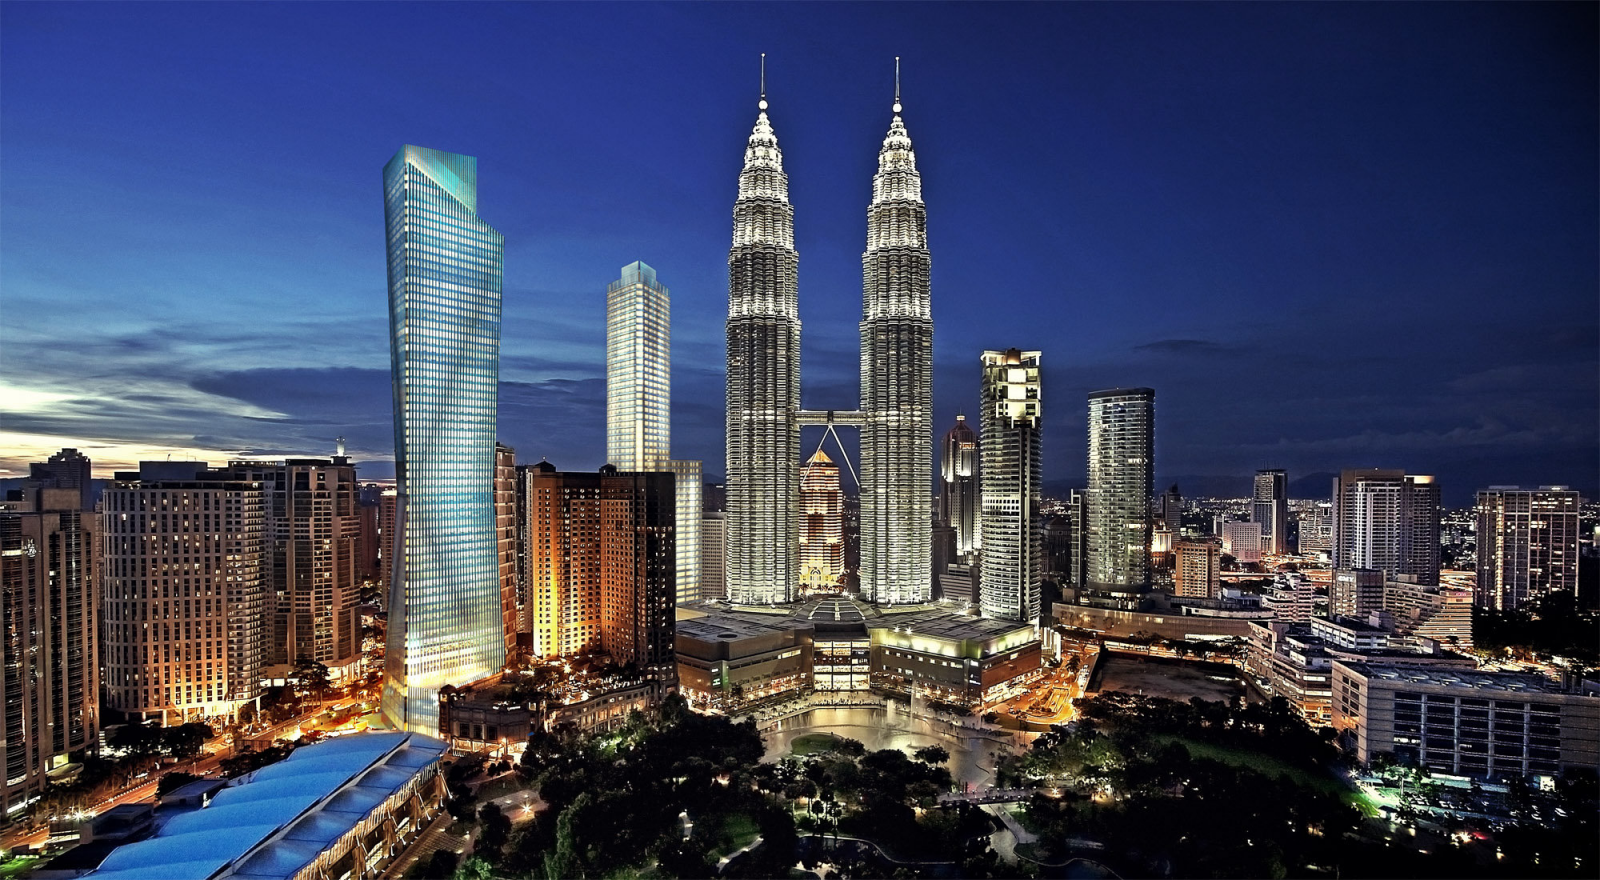 There'll Be a New 700M Skyscraper in KL City Centre Consisting of Three Towers - WORLD OF BUZZ